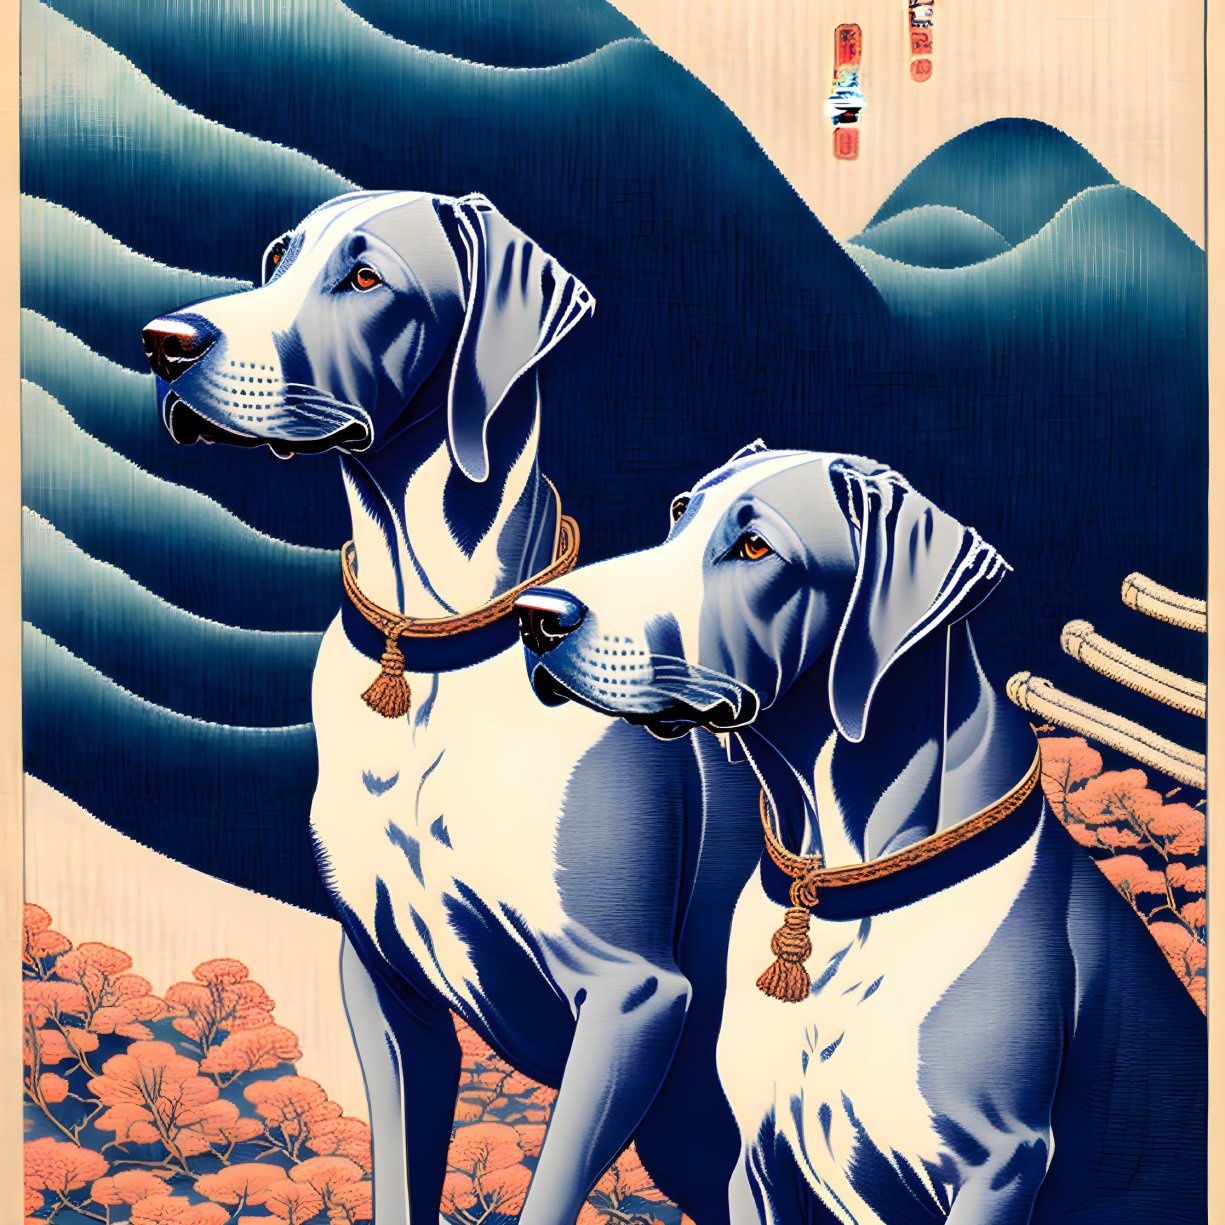 Stylized dogs with decorative collars on Japanese wave and floral background